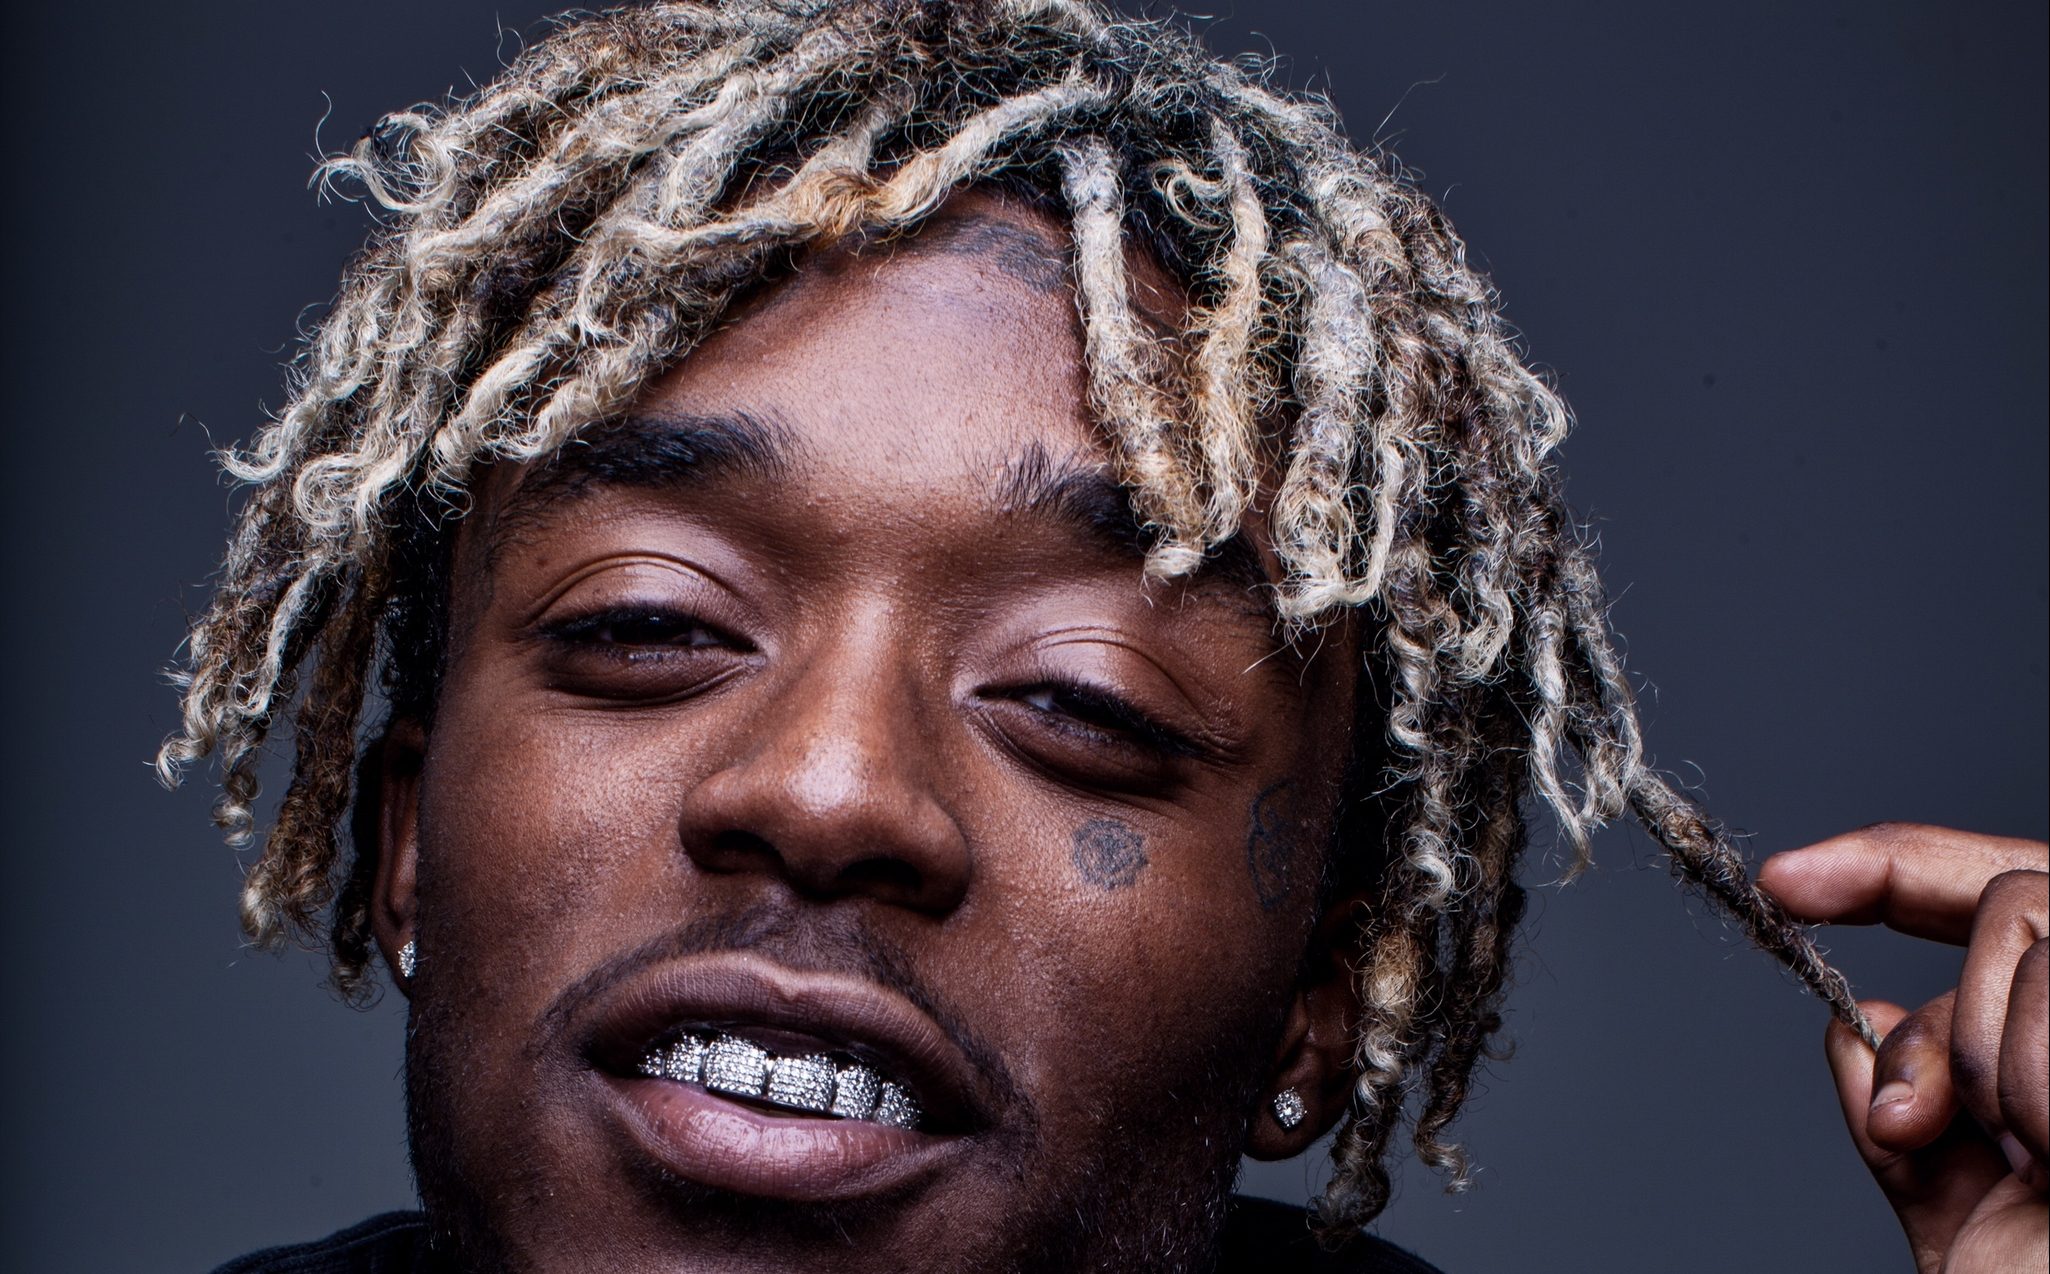 Lil Uzi Vert HD Wallpapers and Backgrounds